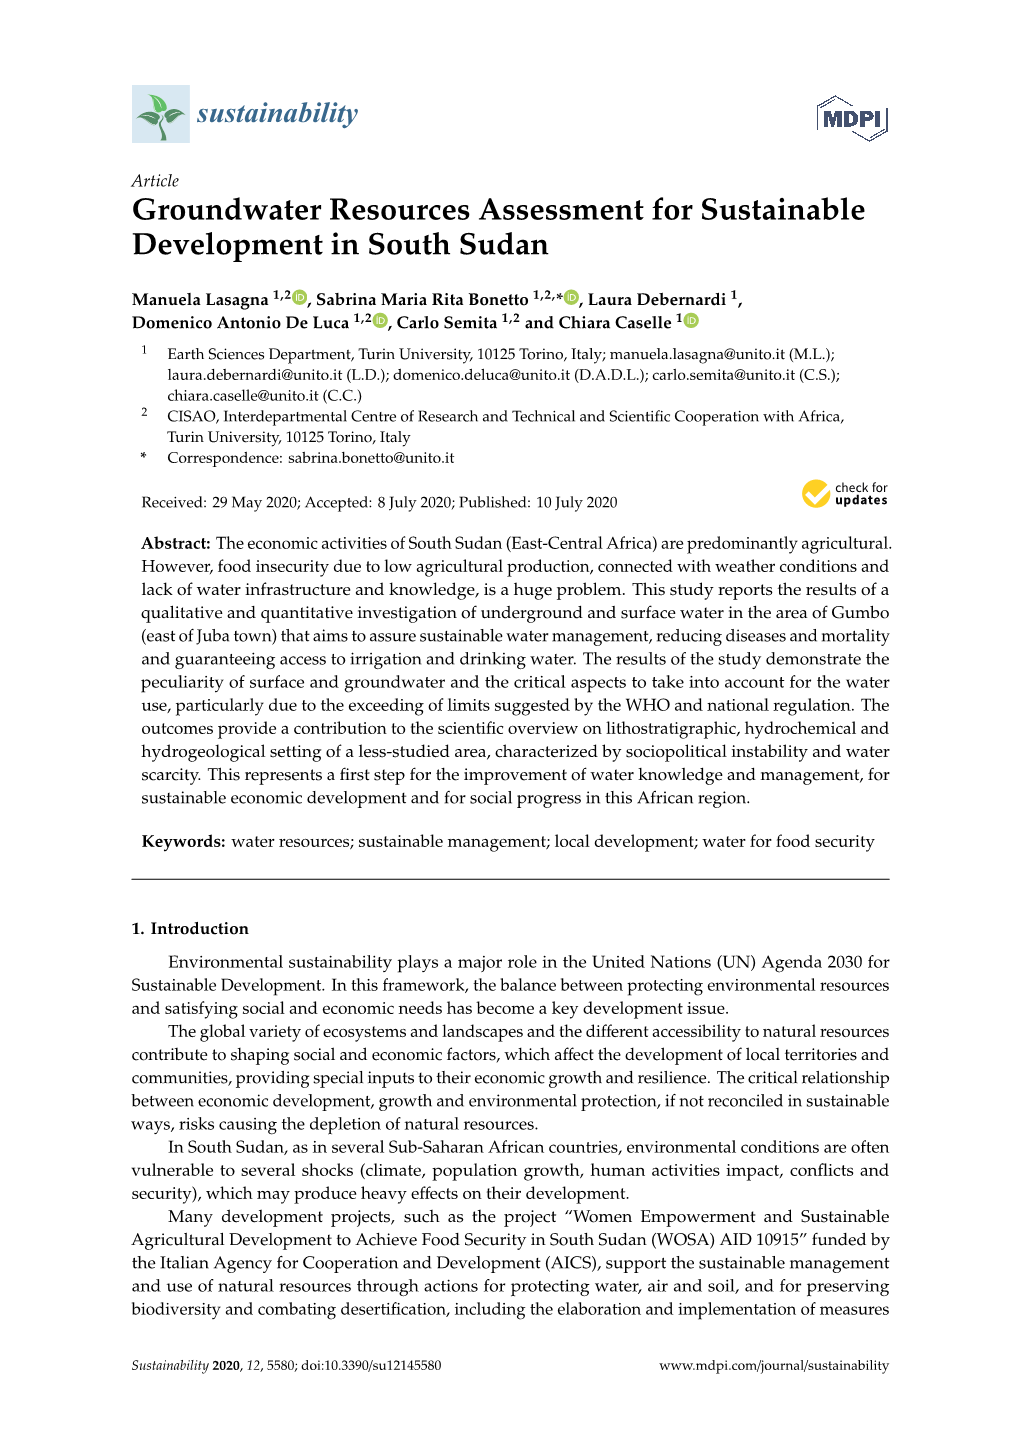 Groundwater Resources Assessment for Sustainable Development in South Sudan